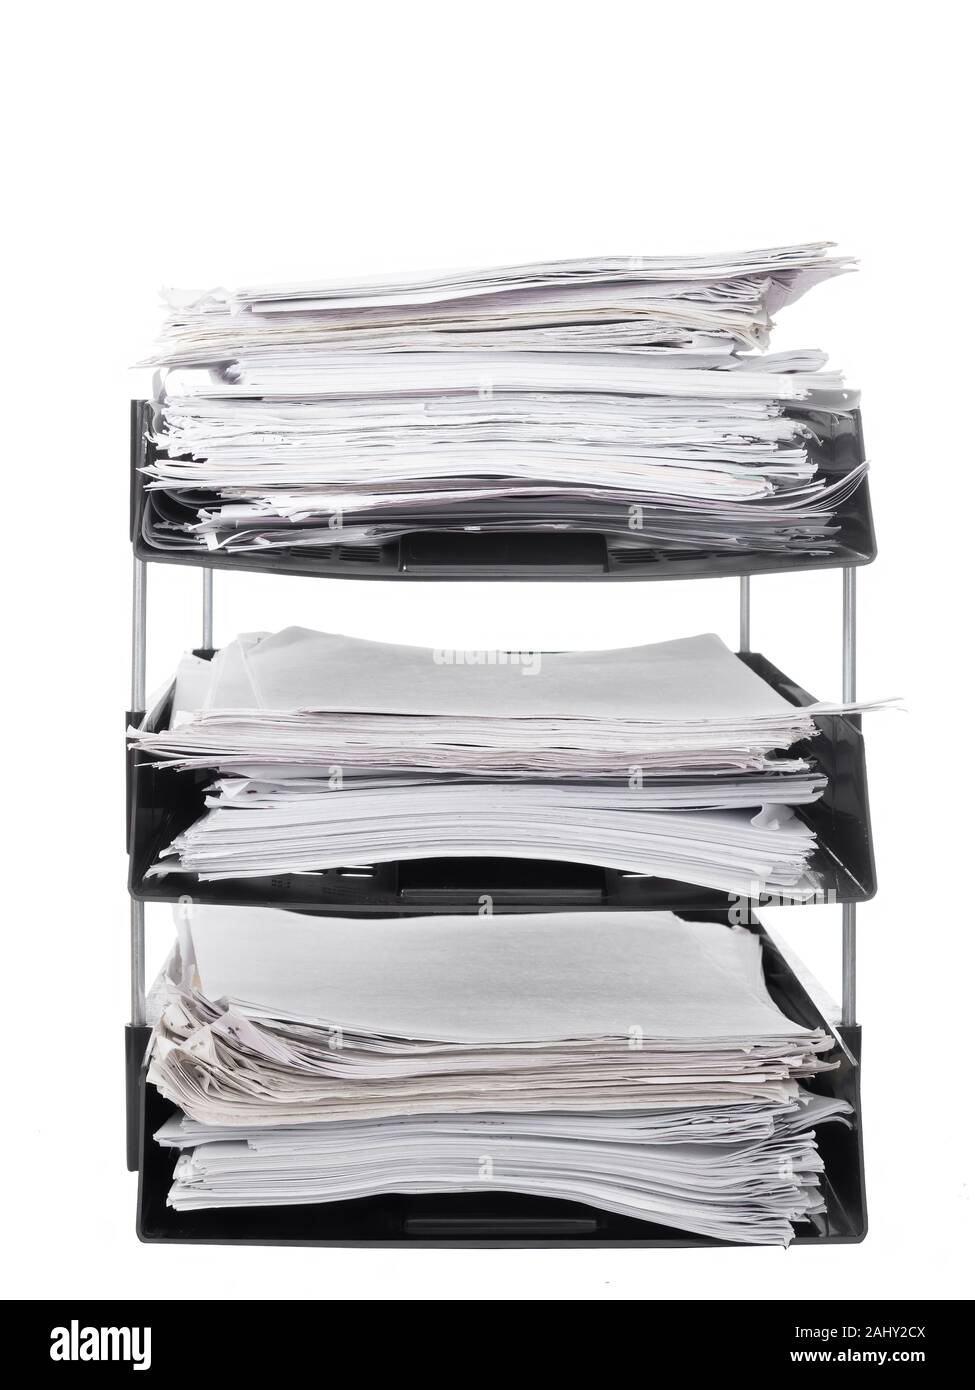 Office paper filing trays isolated on white background. Lots of paperwork, work, bureaucracy. Stock Photo